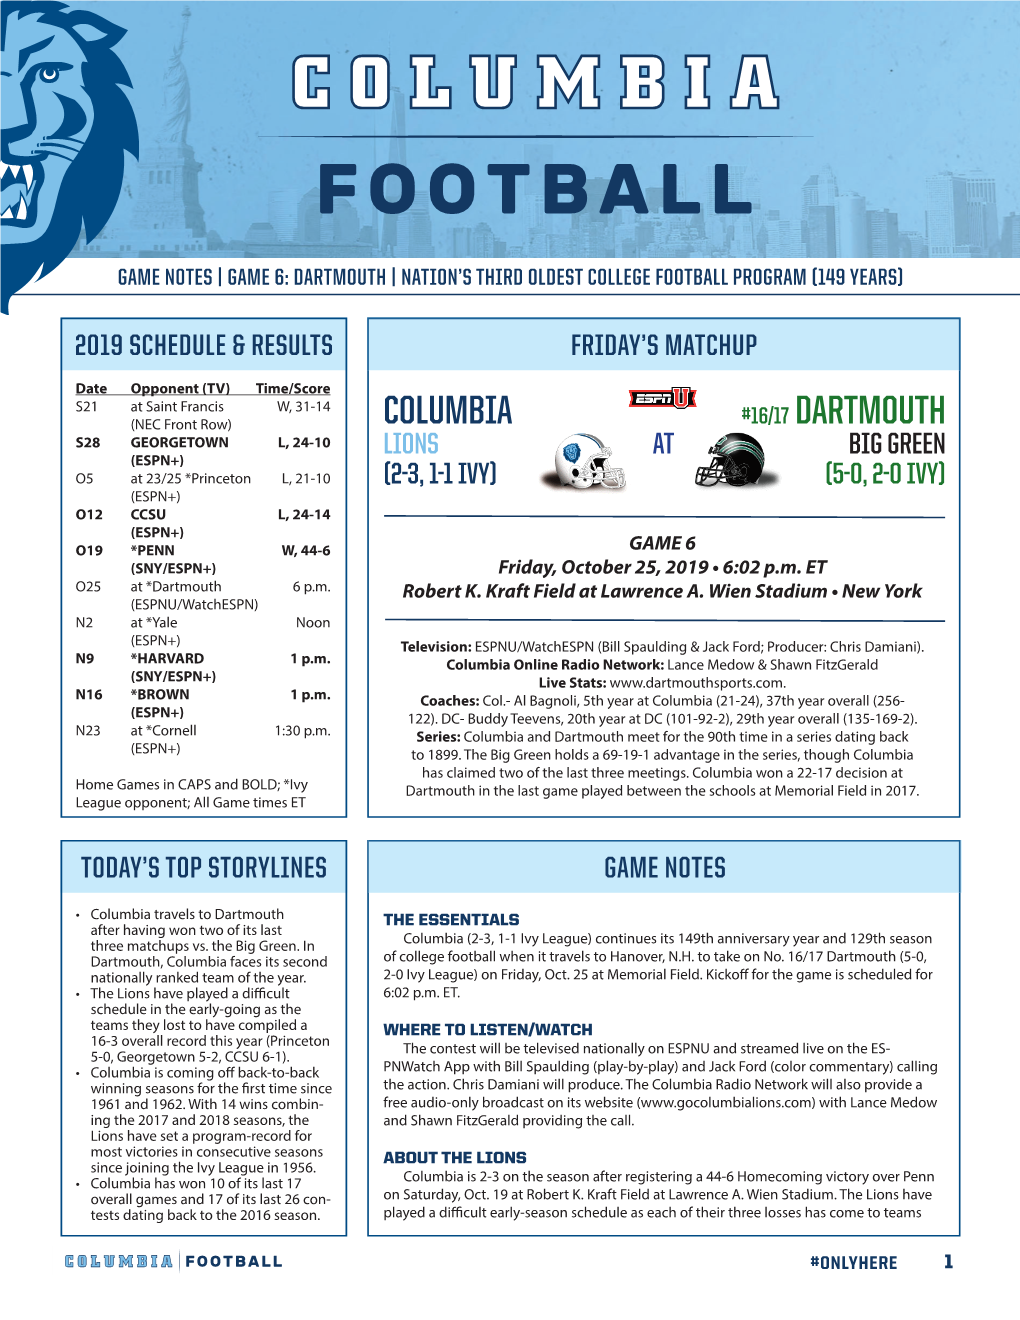 Game Notes Template 2019.Indd